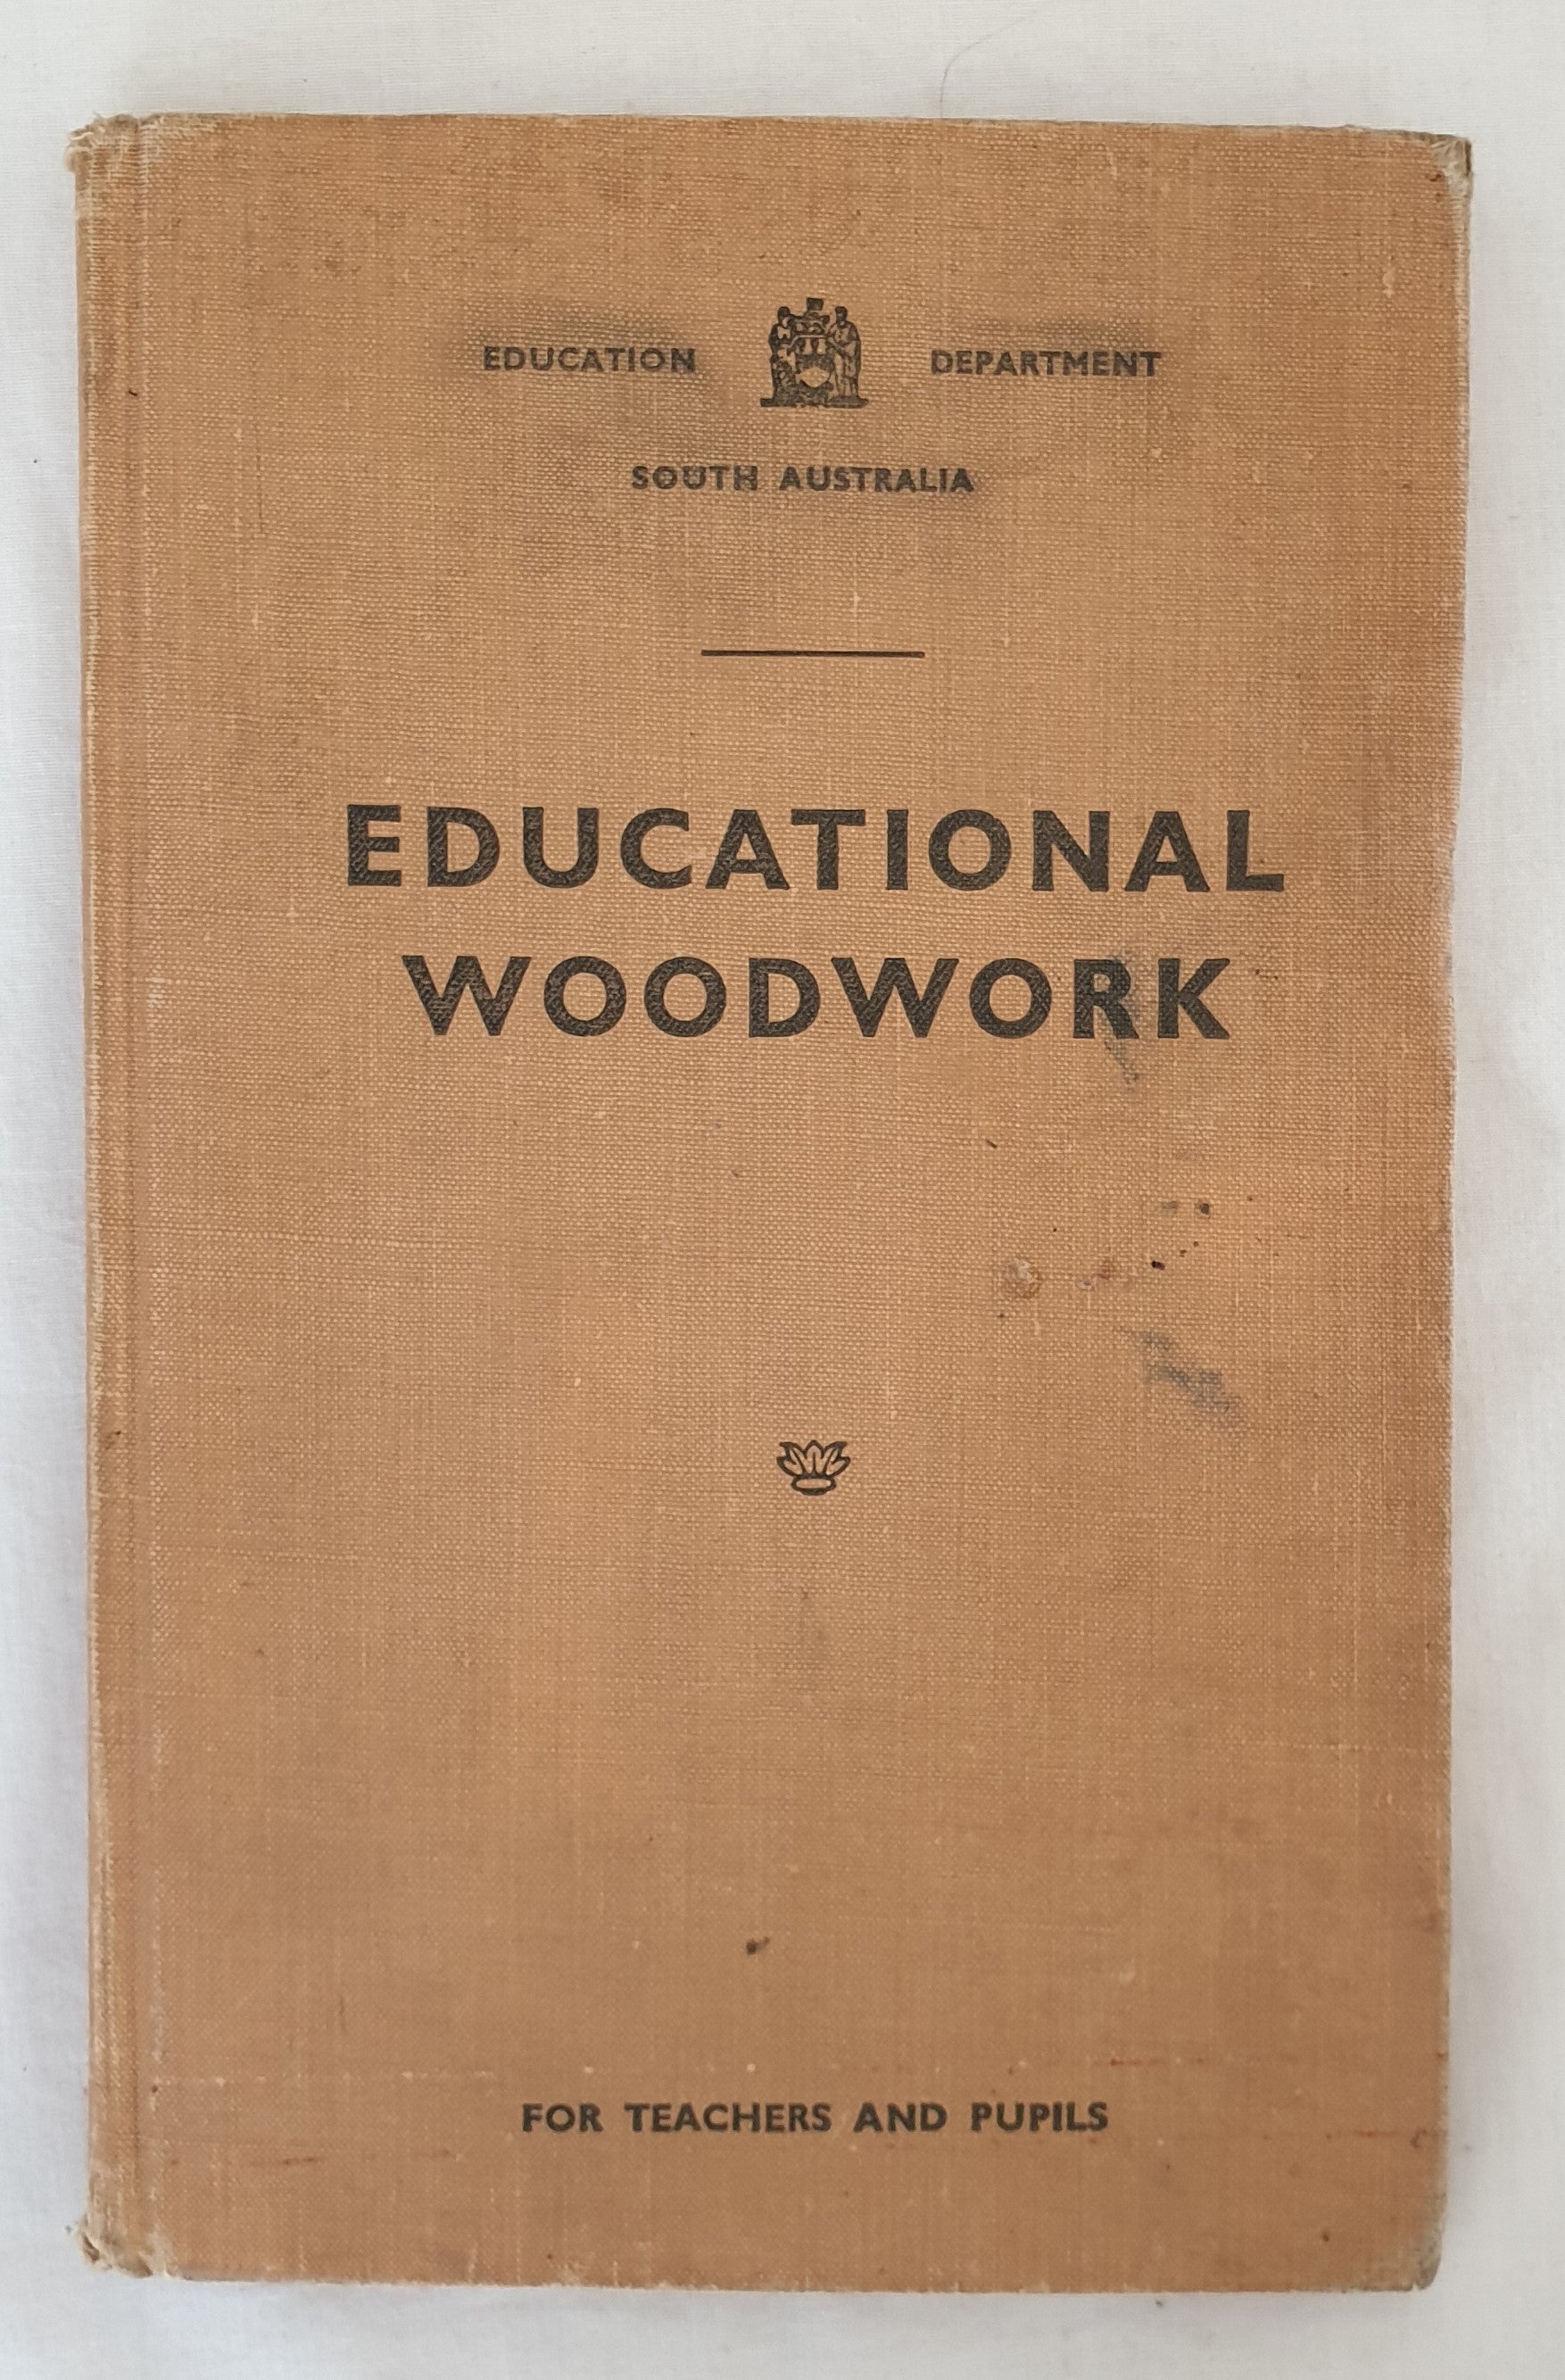 Educational Woodwork by Education Department of South Australia